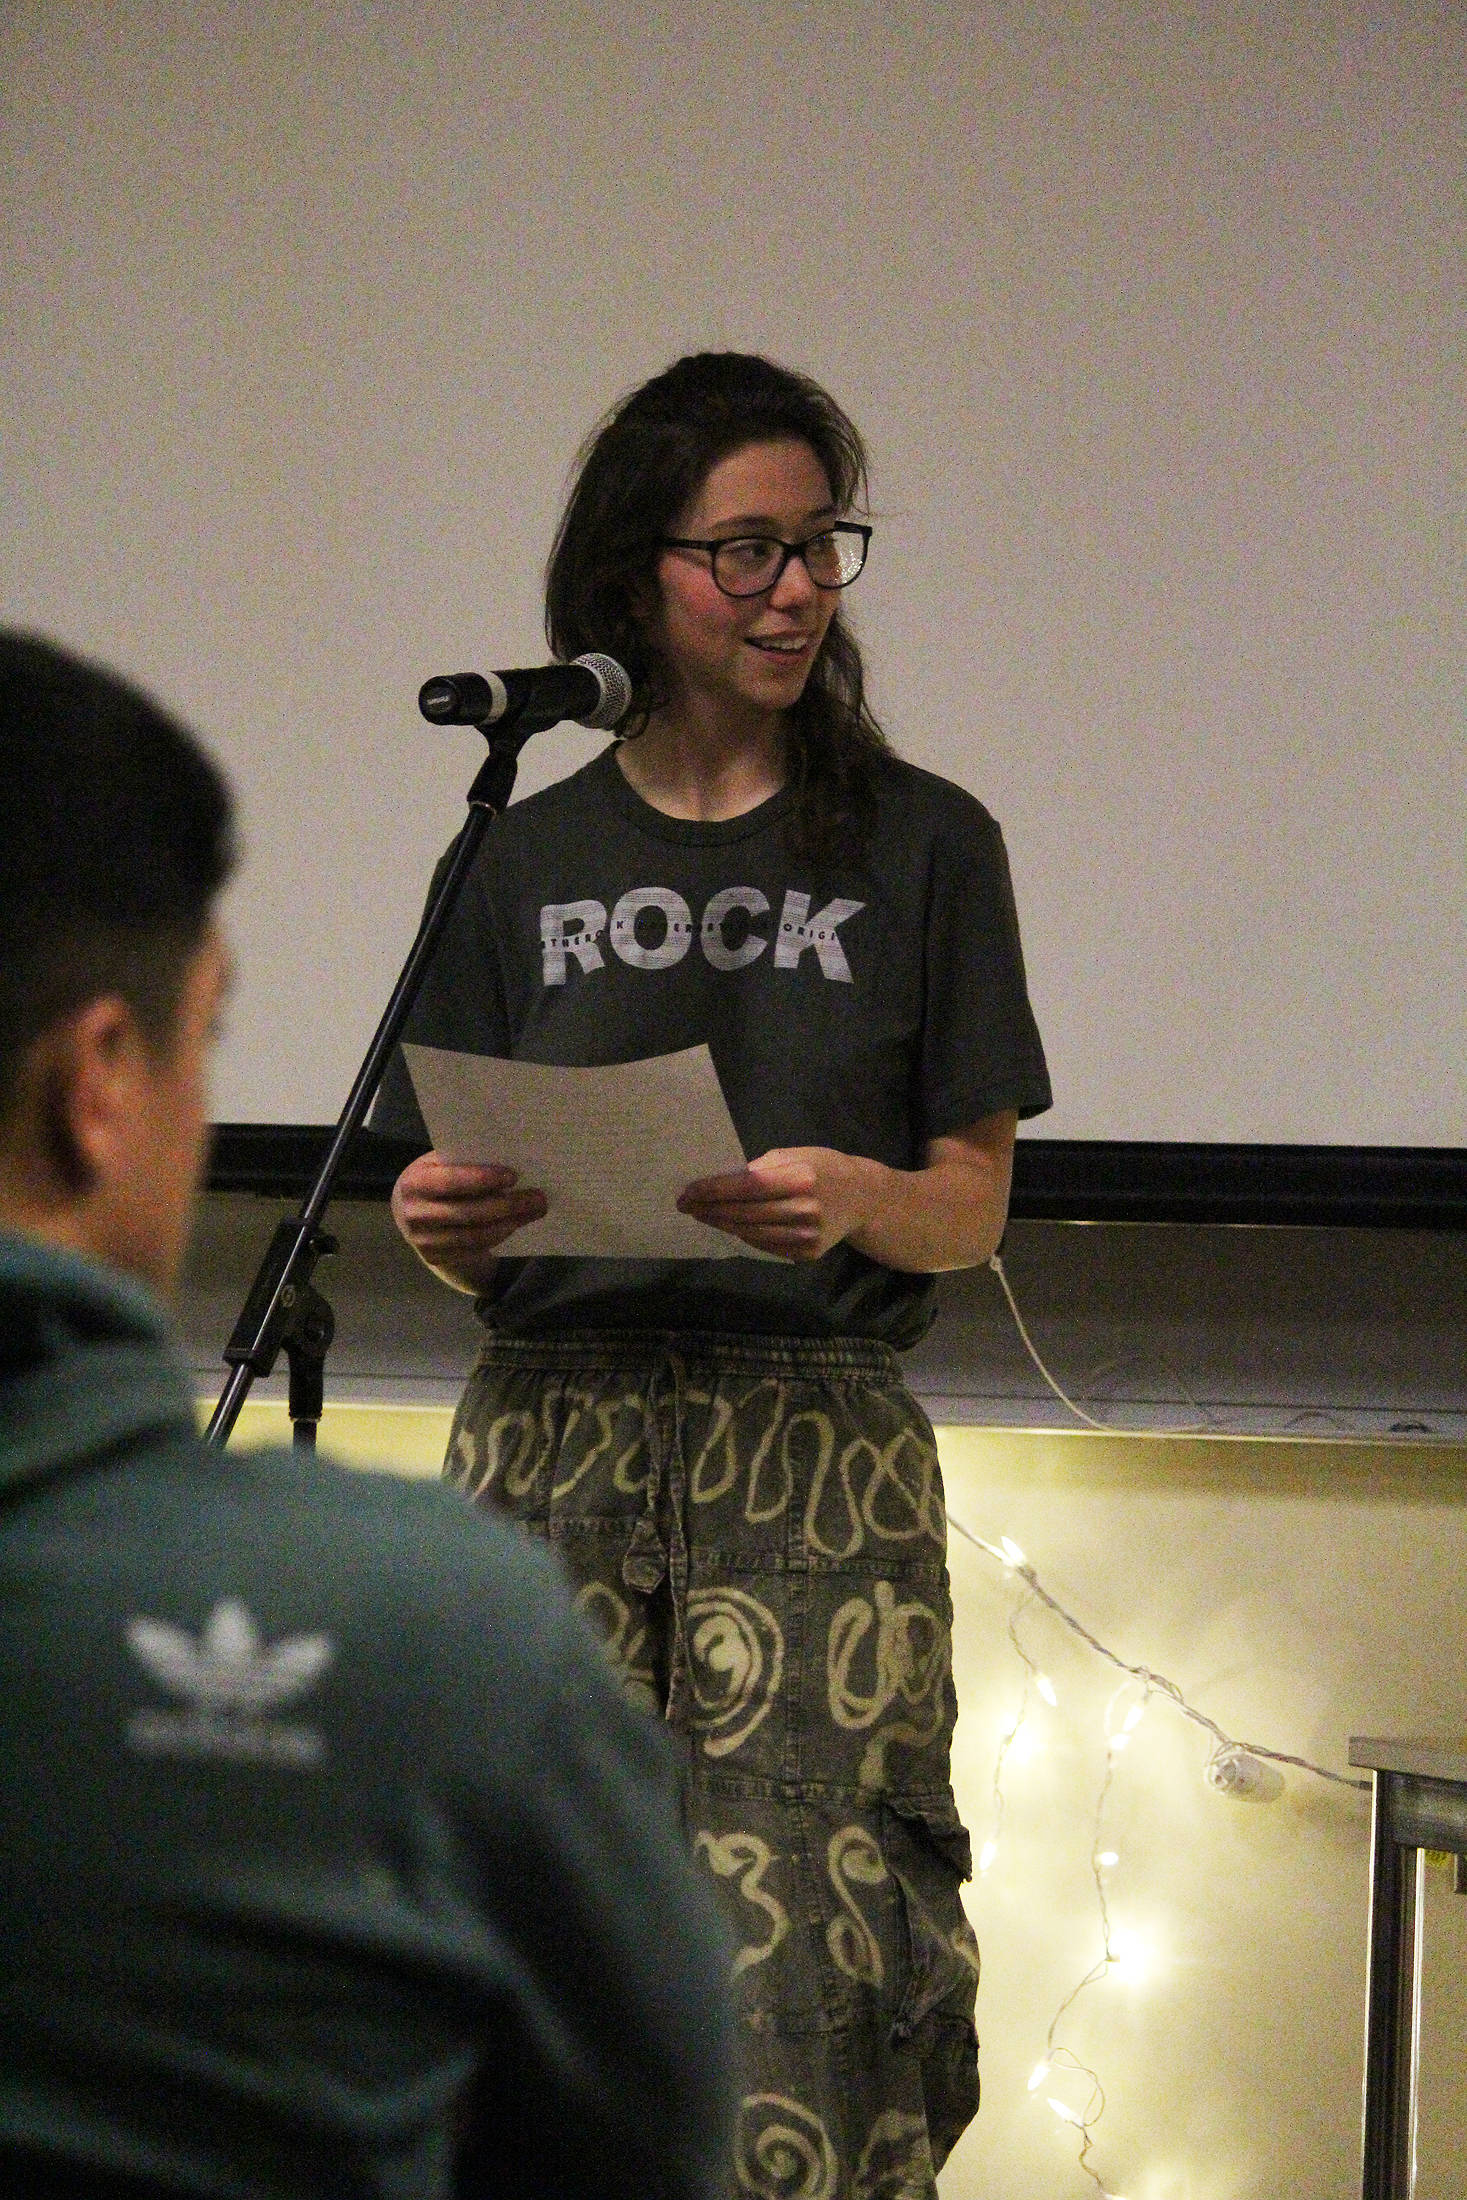 Homer Flex student Zoe Kramer, 17, reads a sonnet she wrote during a Coffee House event held Tuesday, Dec. 5, 2017 at Pioneer Hall on Kachemak Bay Campus in Homer, Alaska. Hosted by the campus Student Association, the Coffee House provided an opportunity for students, many of whom were in a creative writing class at the college, to share their poems, short stories and essays in public. (Photo by Megan Pacer/Homer News)